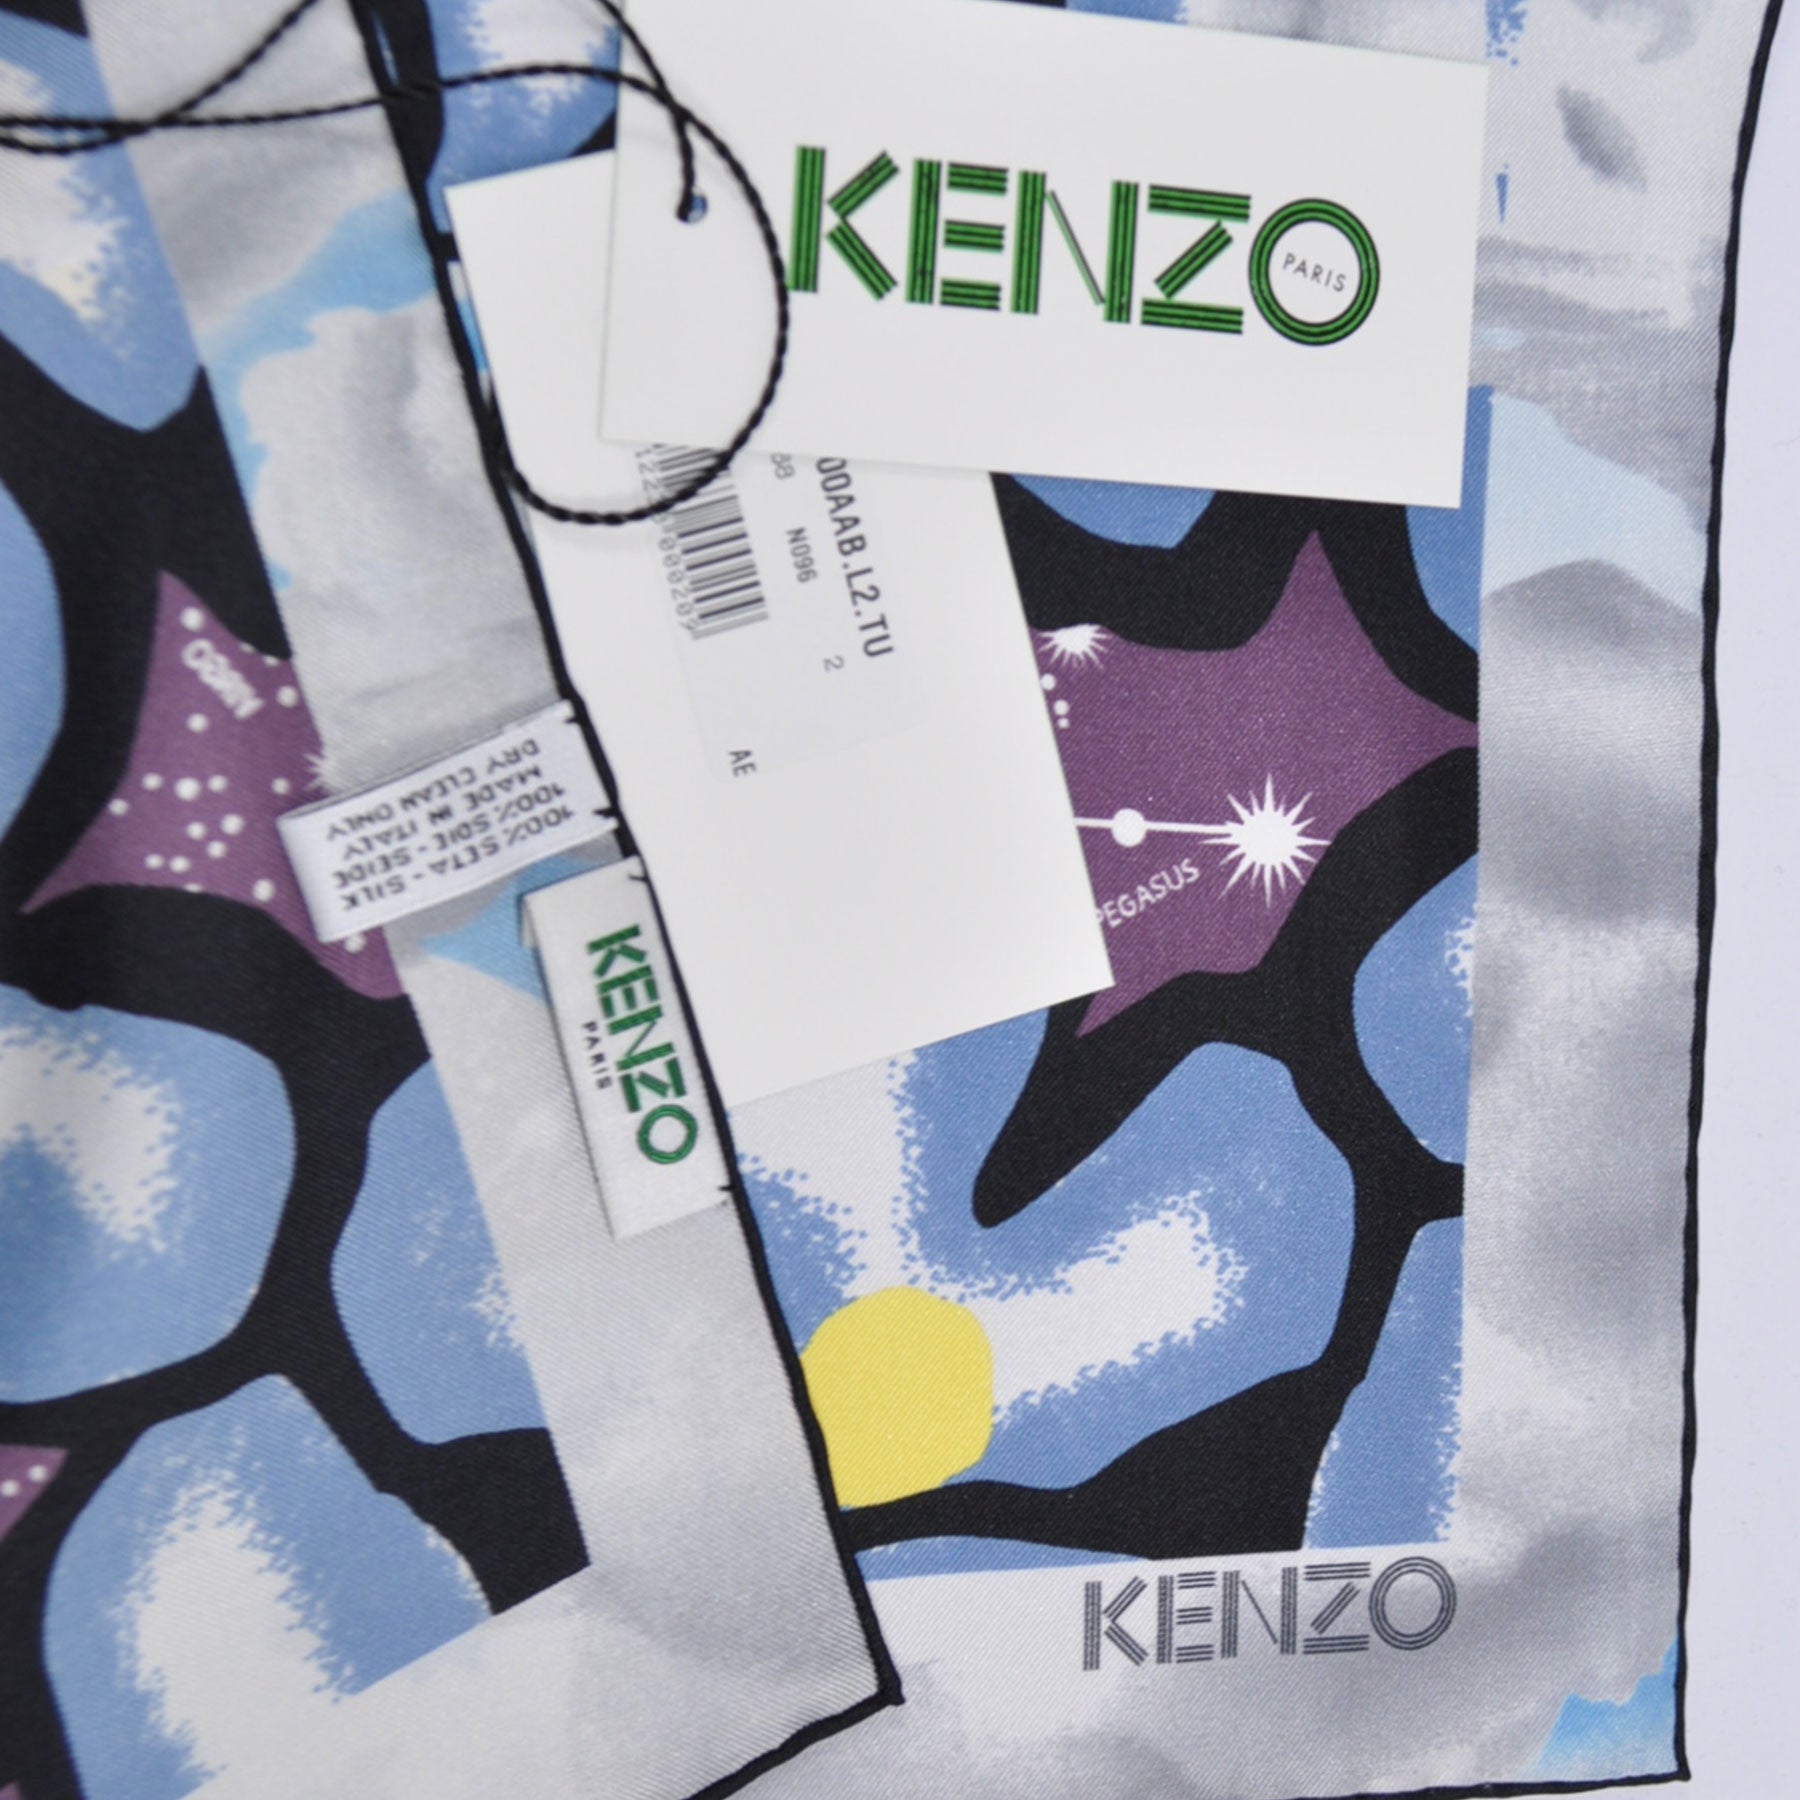 Kenzo Scarf Midnight Blue Floral Horoscope Print Silk Large Square Scarf